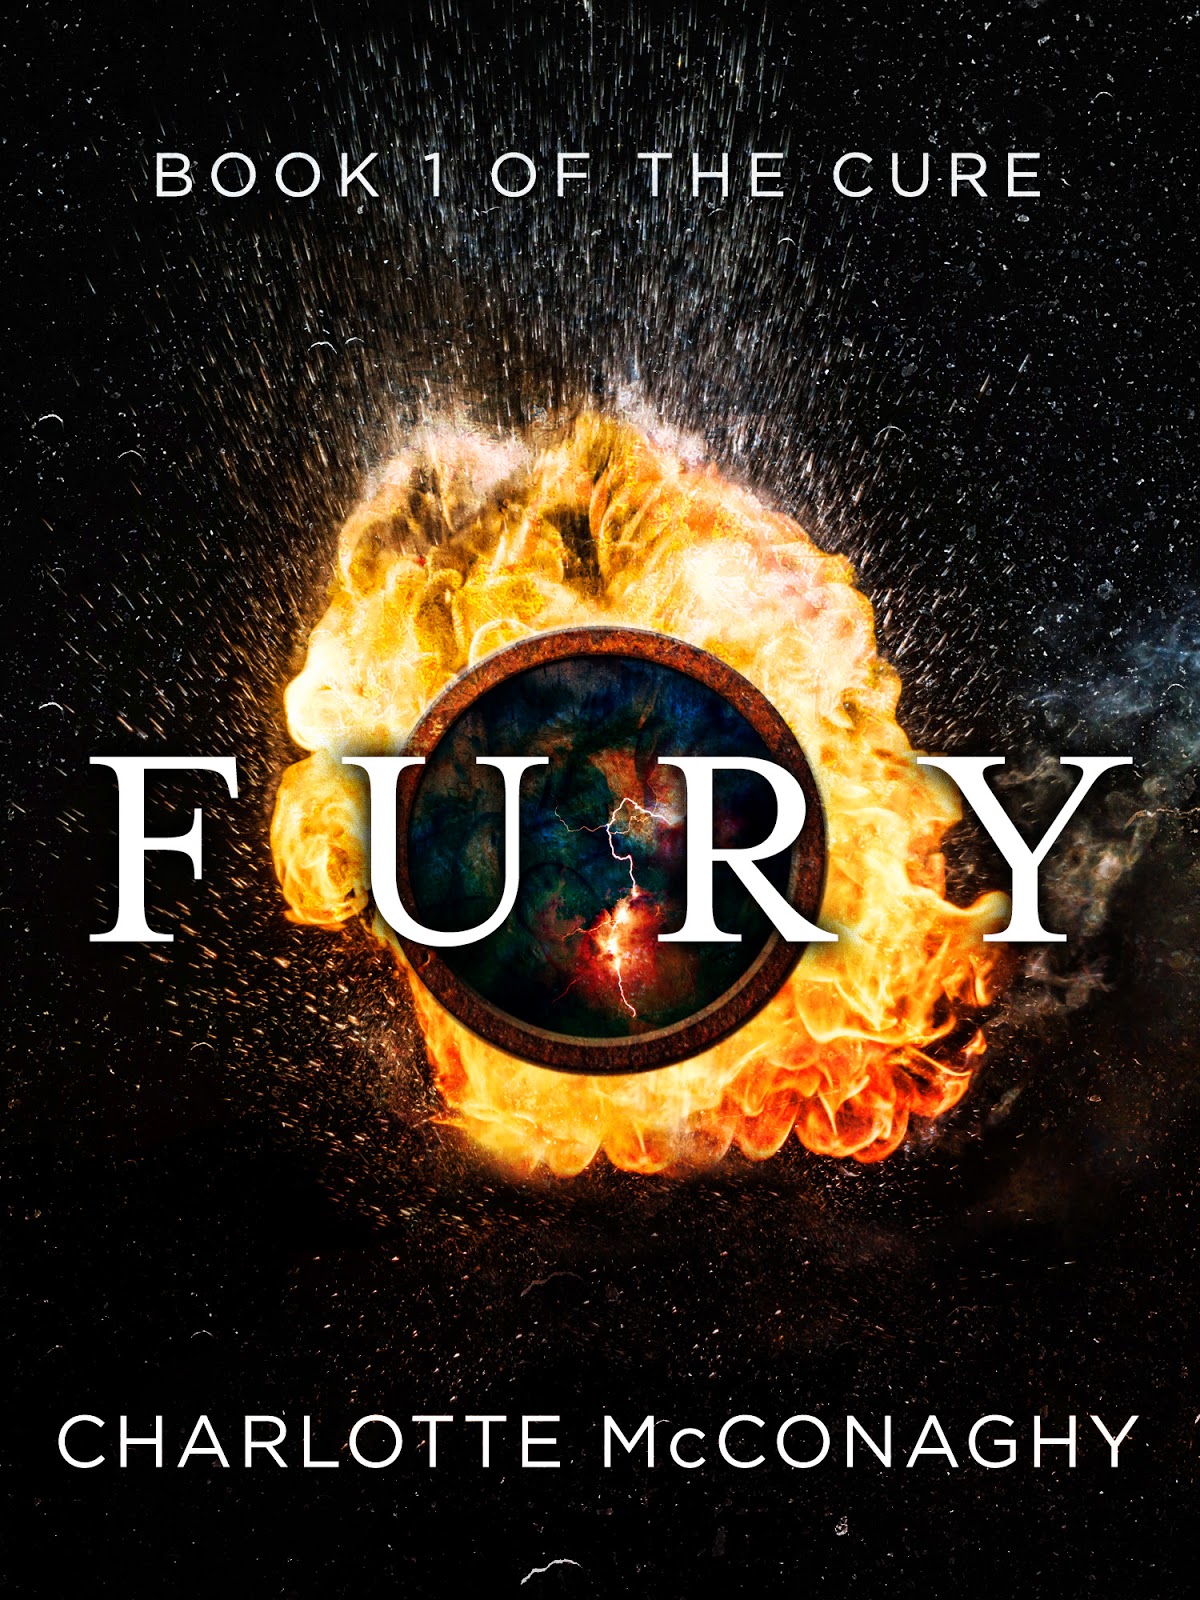 CBY Book Club: Blog Tour Interview & Giveaway - Fury by Charlotte McConaghy